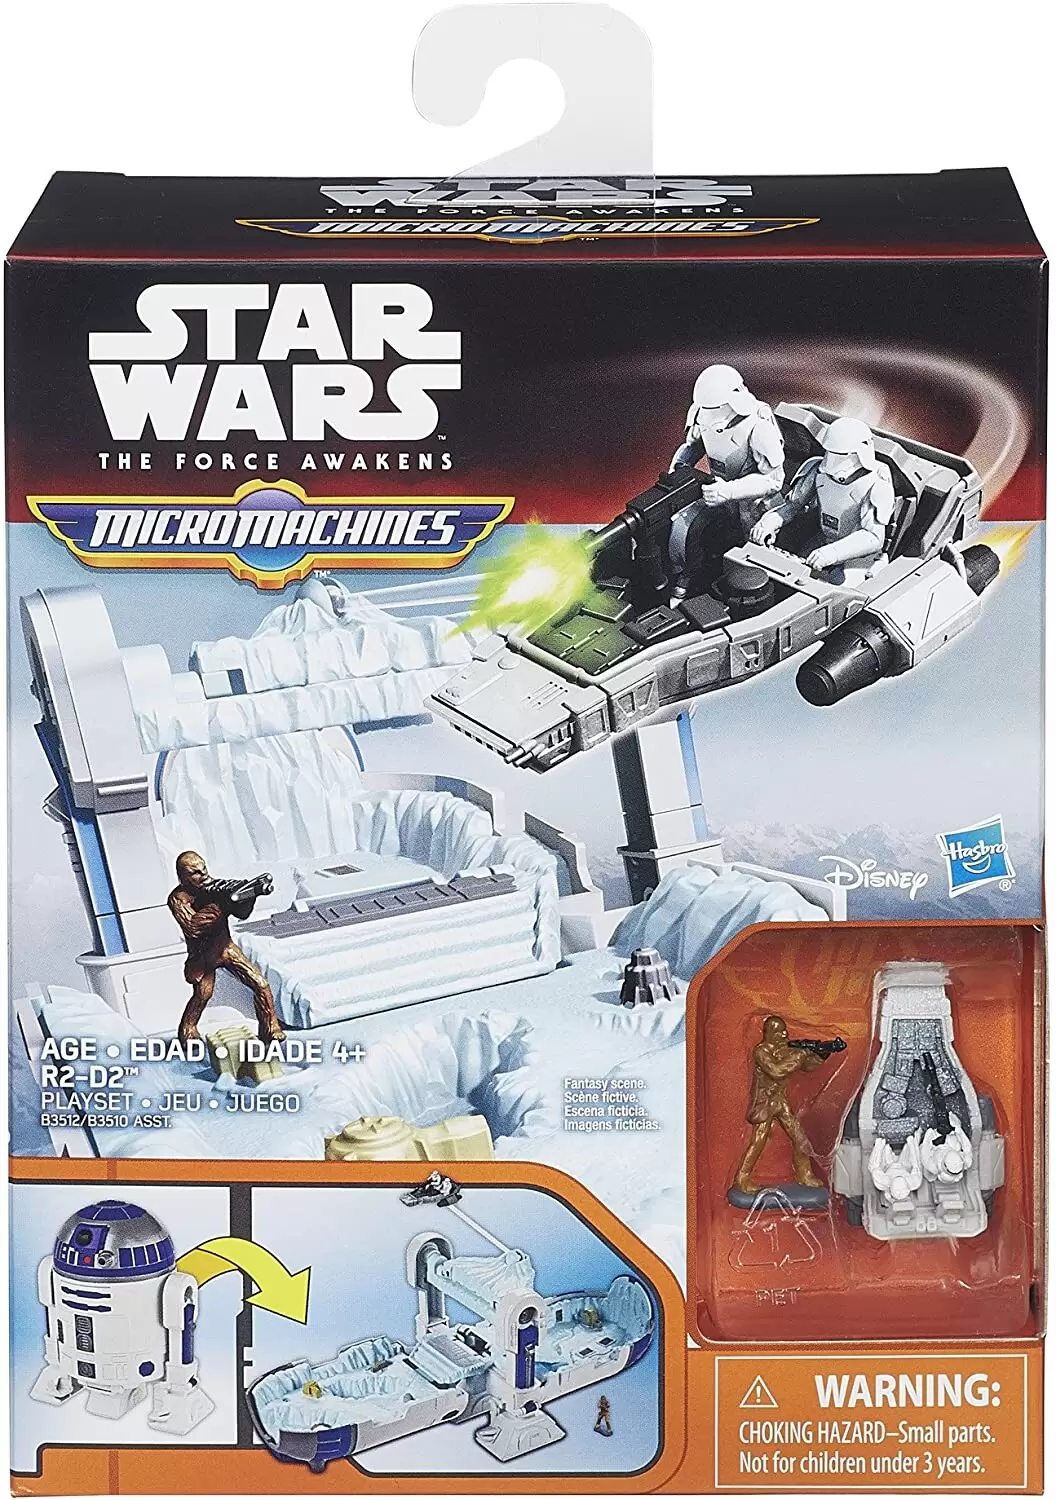 Play Sets - R2-D2 Playset